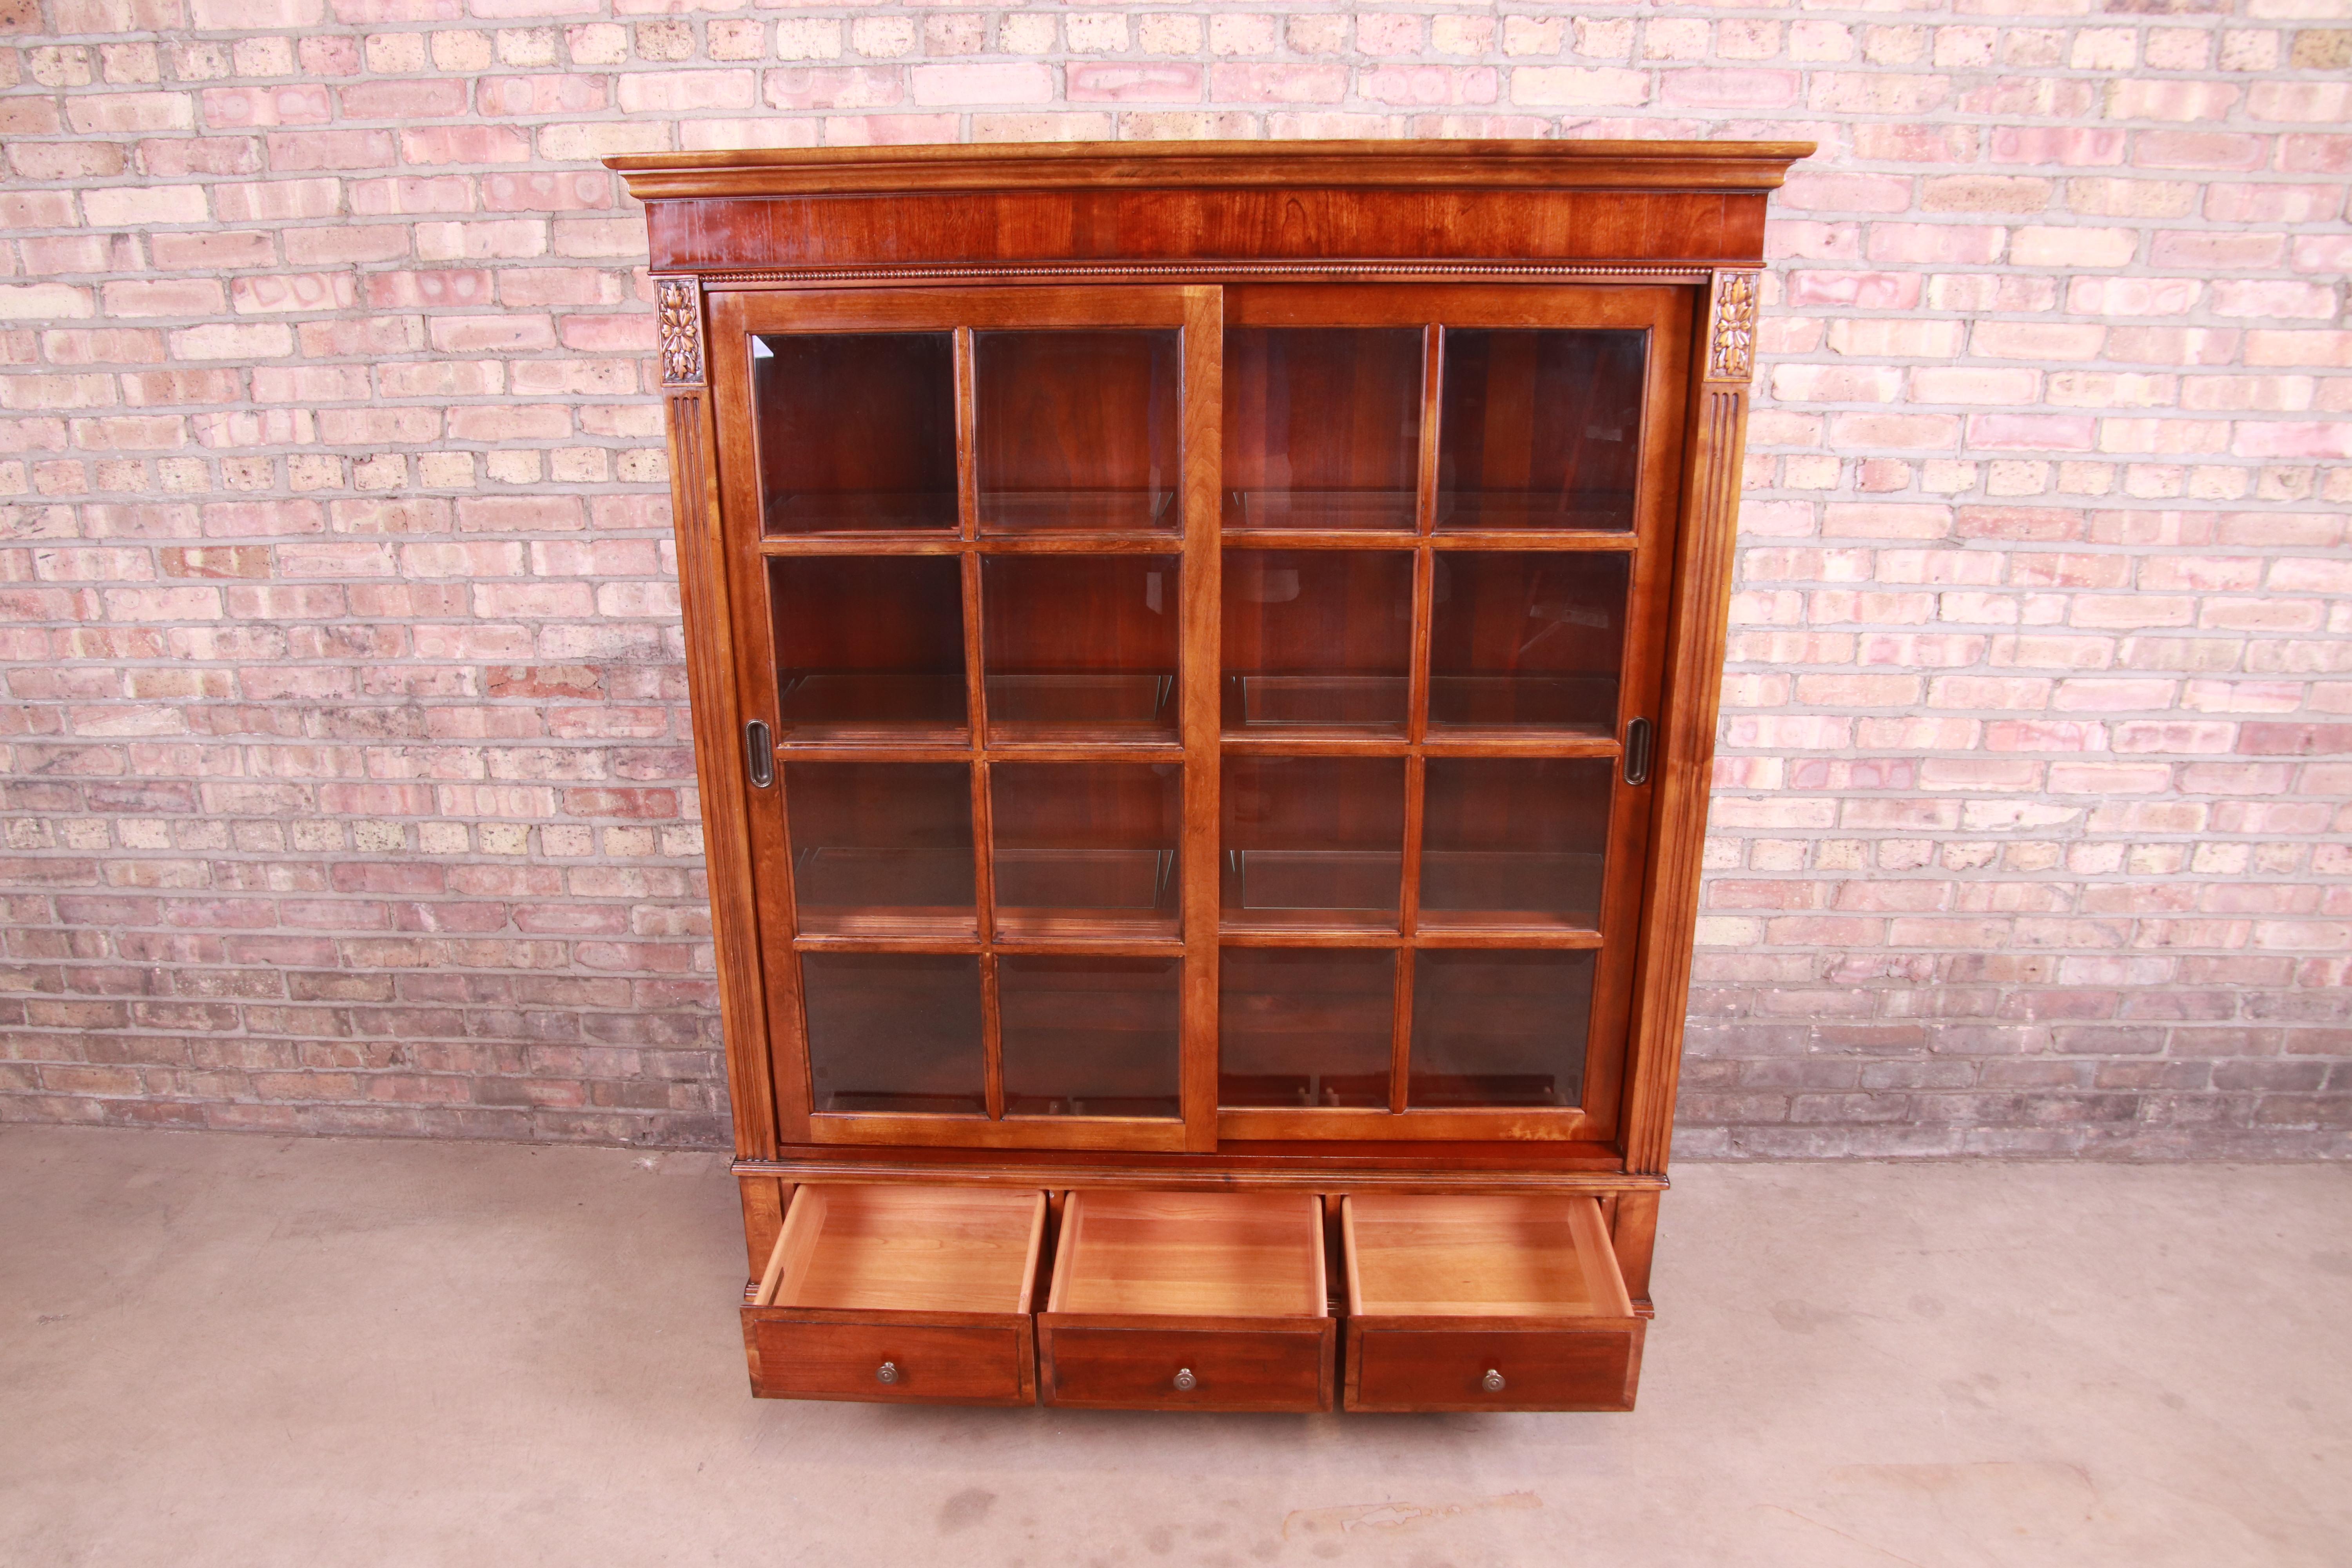 20th Century Ethan Allen French Regency Cherry Wood Lighted Bookcase or Display Cabinet